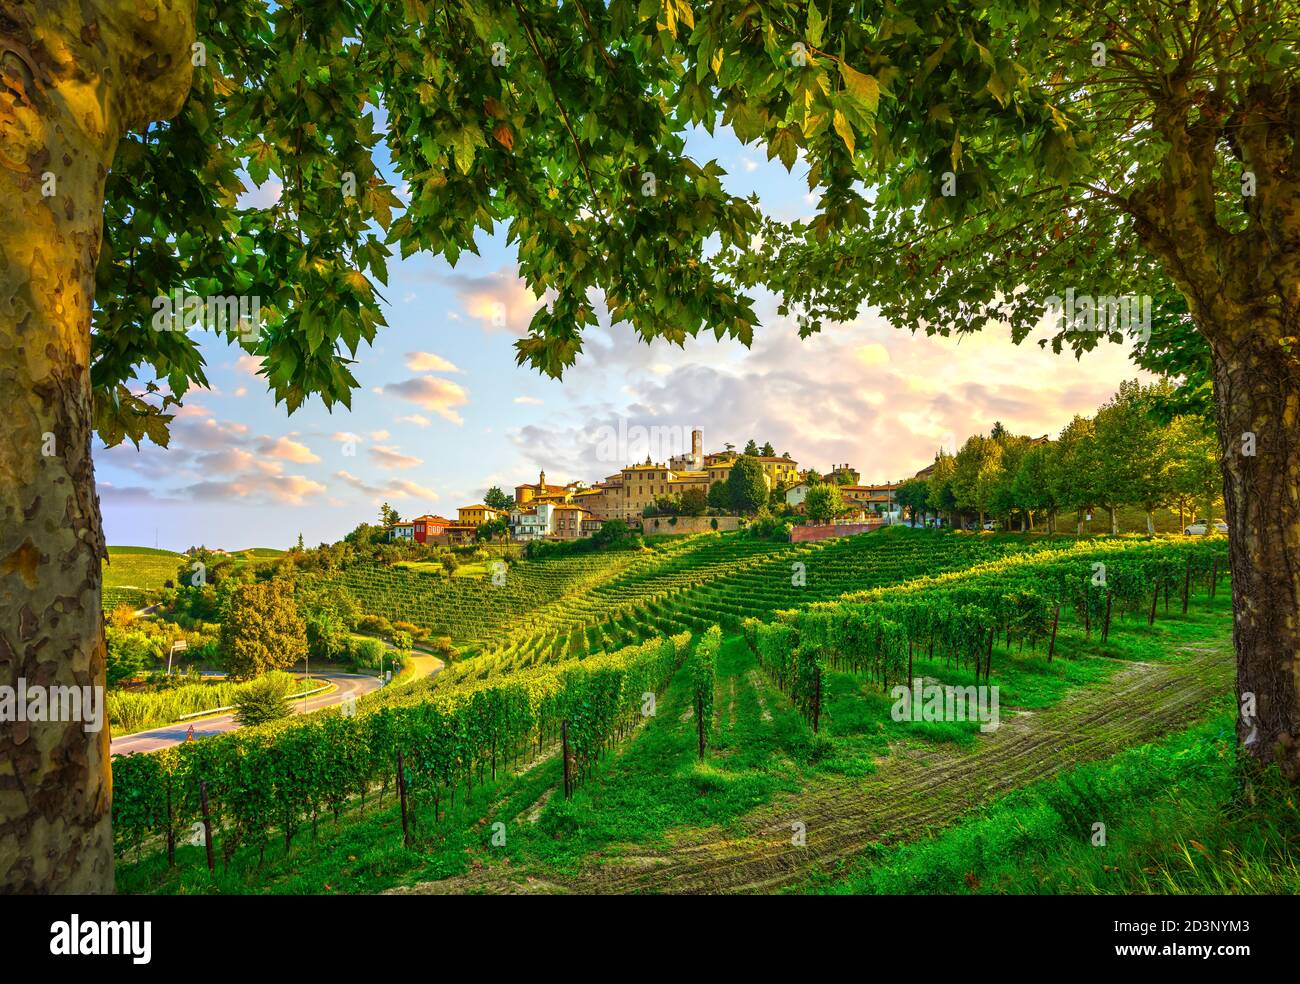 Neive village, Langhe vineyards and trees as a frame. Unesco Site, Piedmont, Northern Italy Europe. Stock Photo